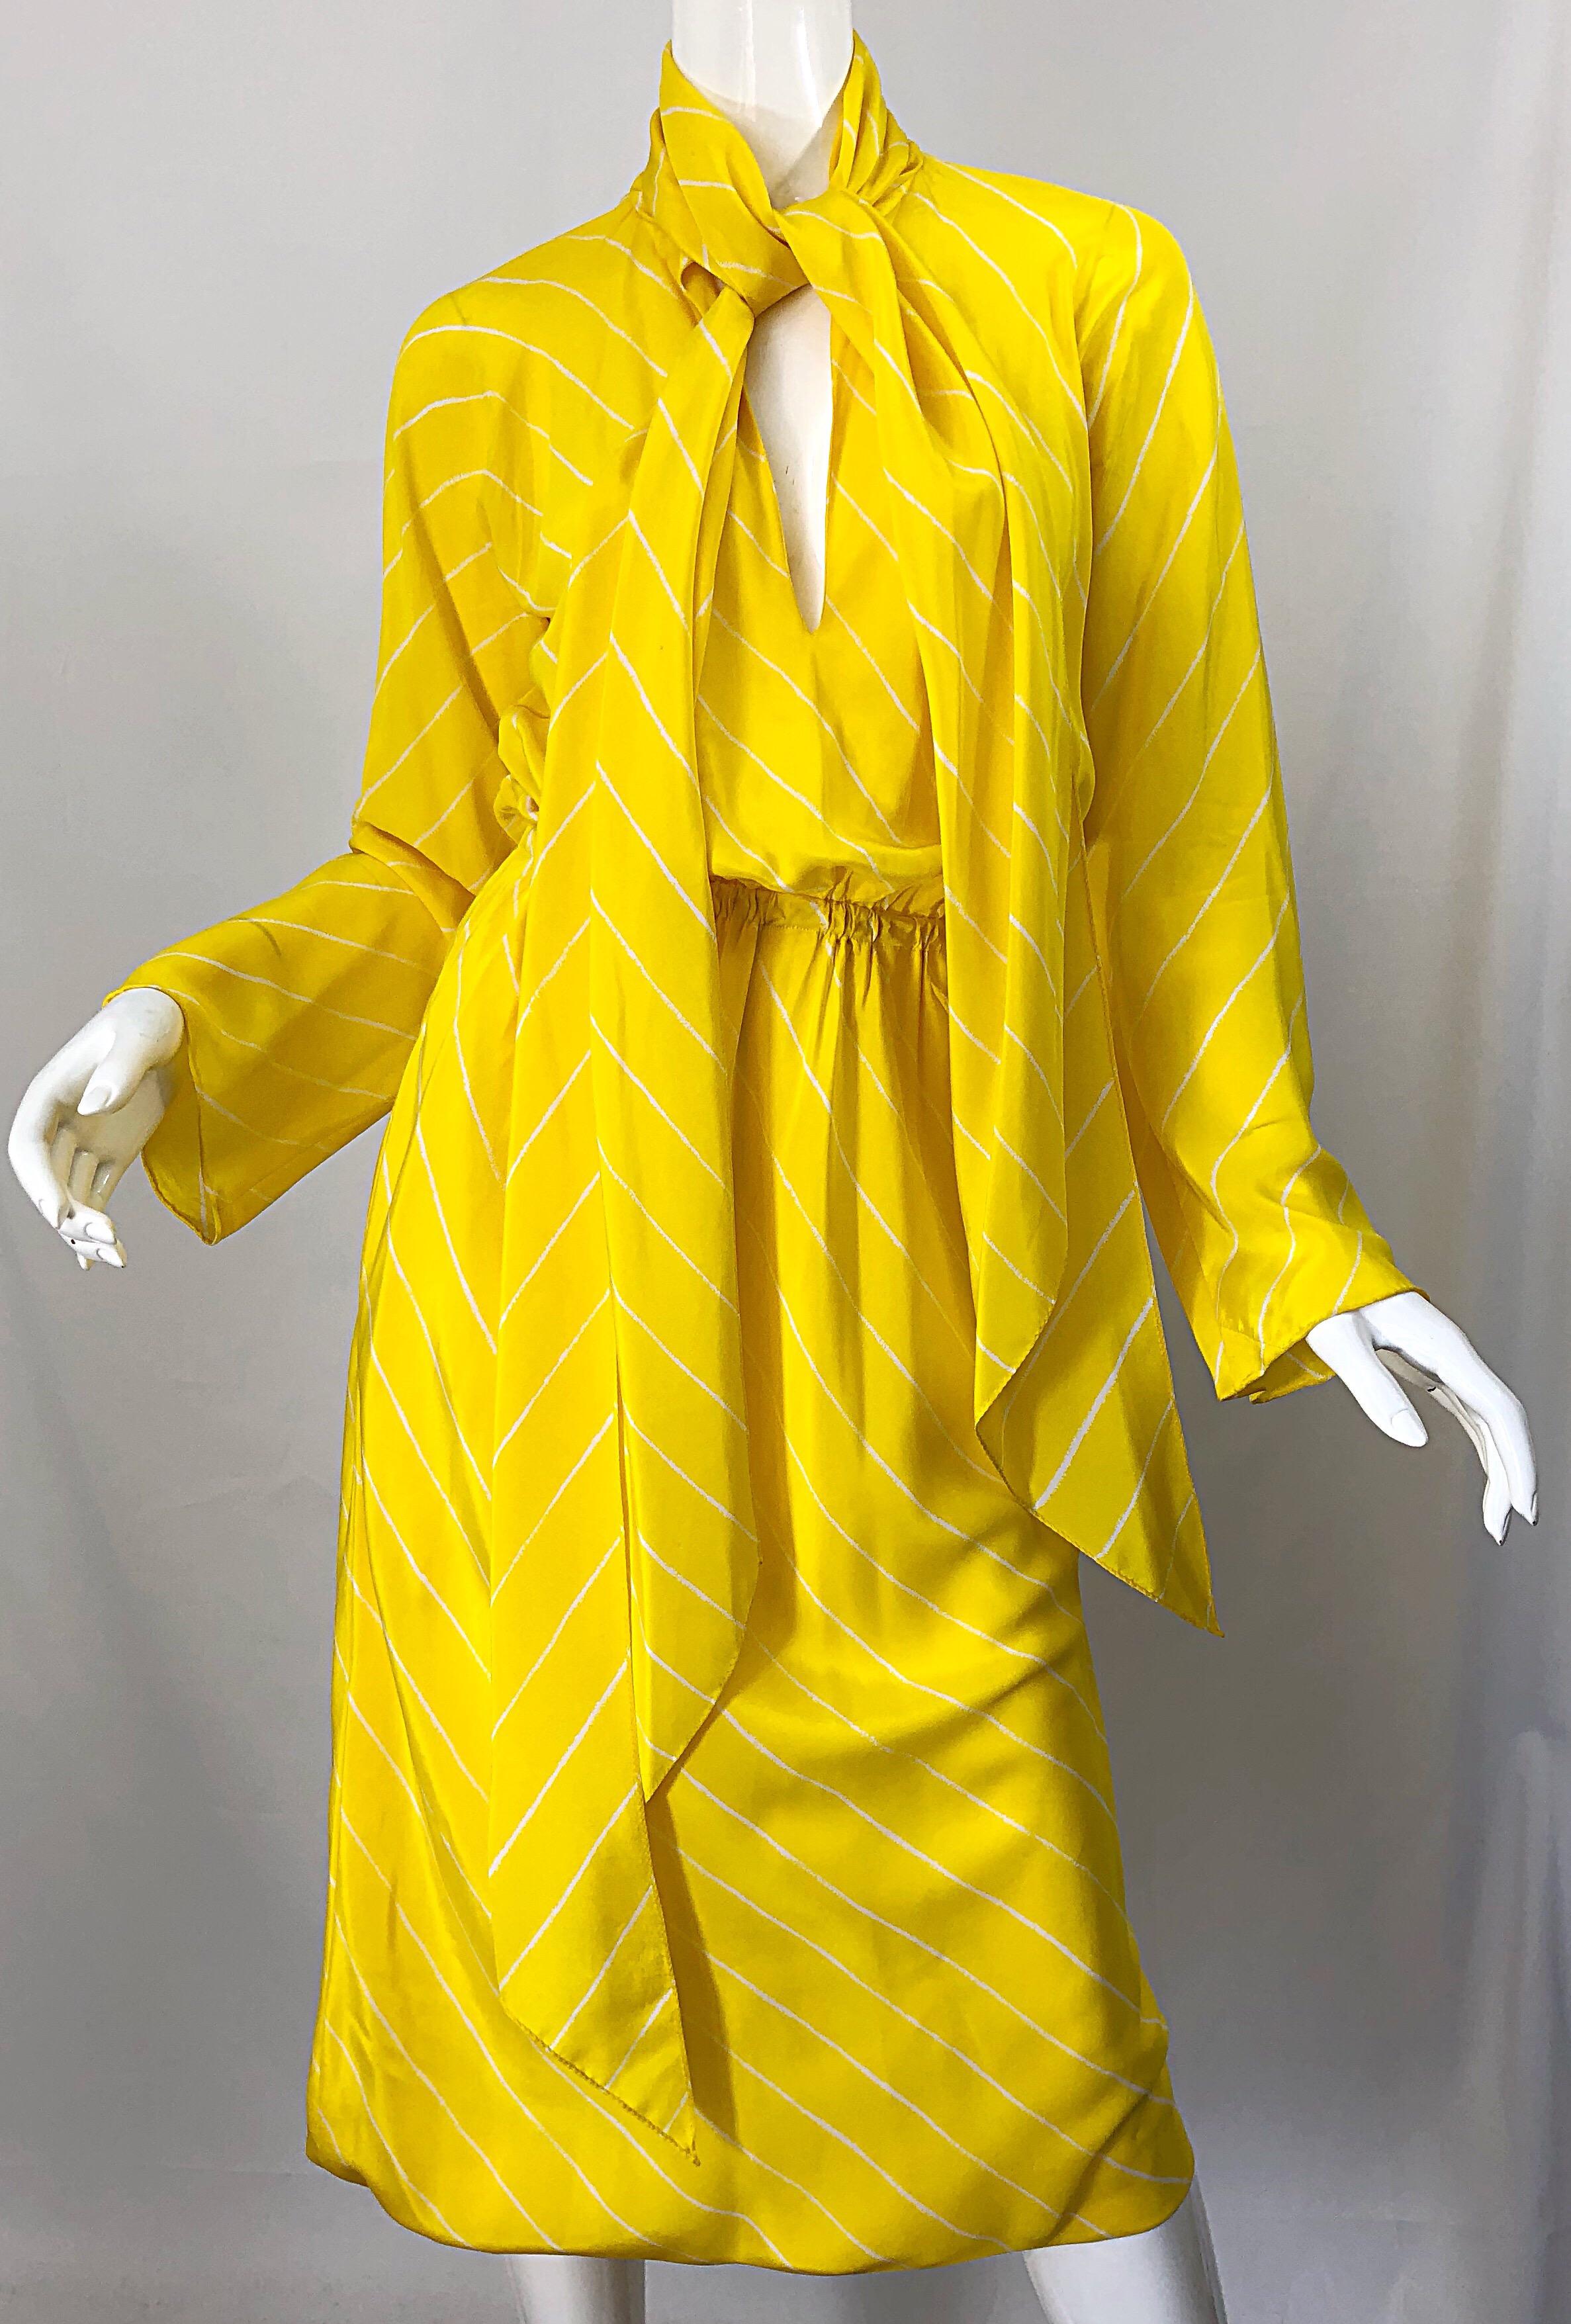 1970s Halston Canary Yellow + White Chevron Striped Bell Sleeve 70s Scarf Dress 3